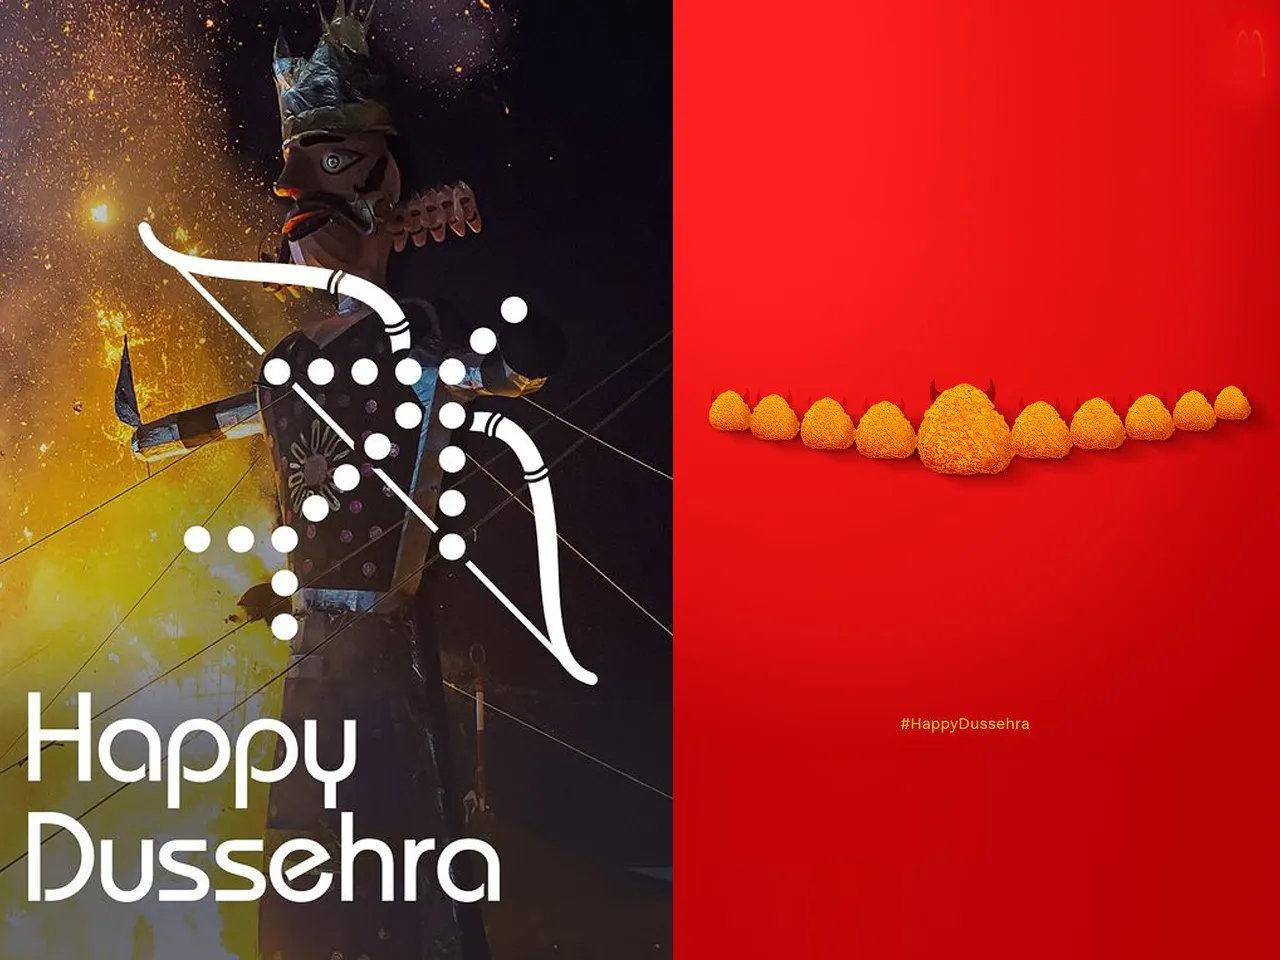 Brands celebrate victory of good over evil with Dussehra creatives